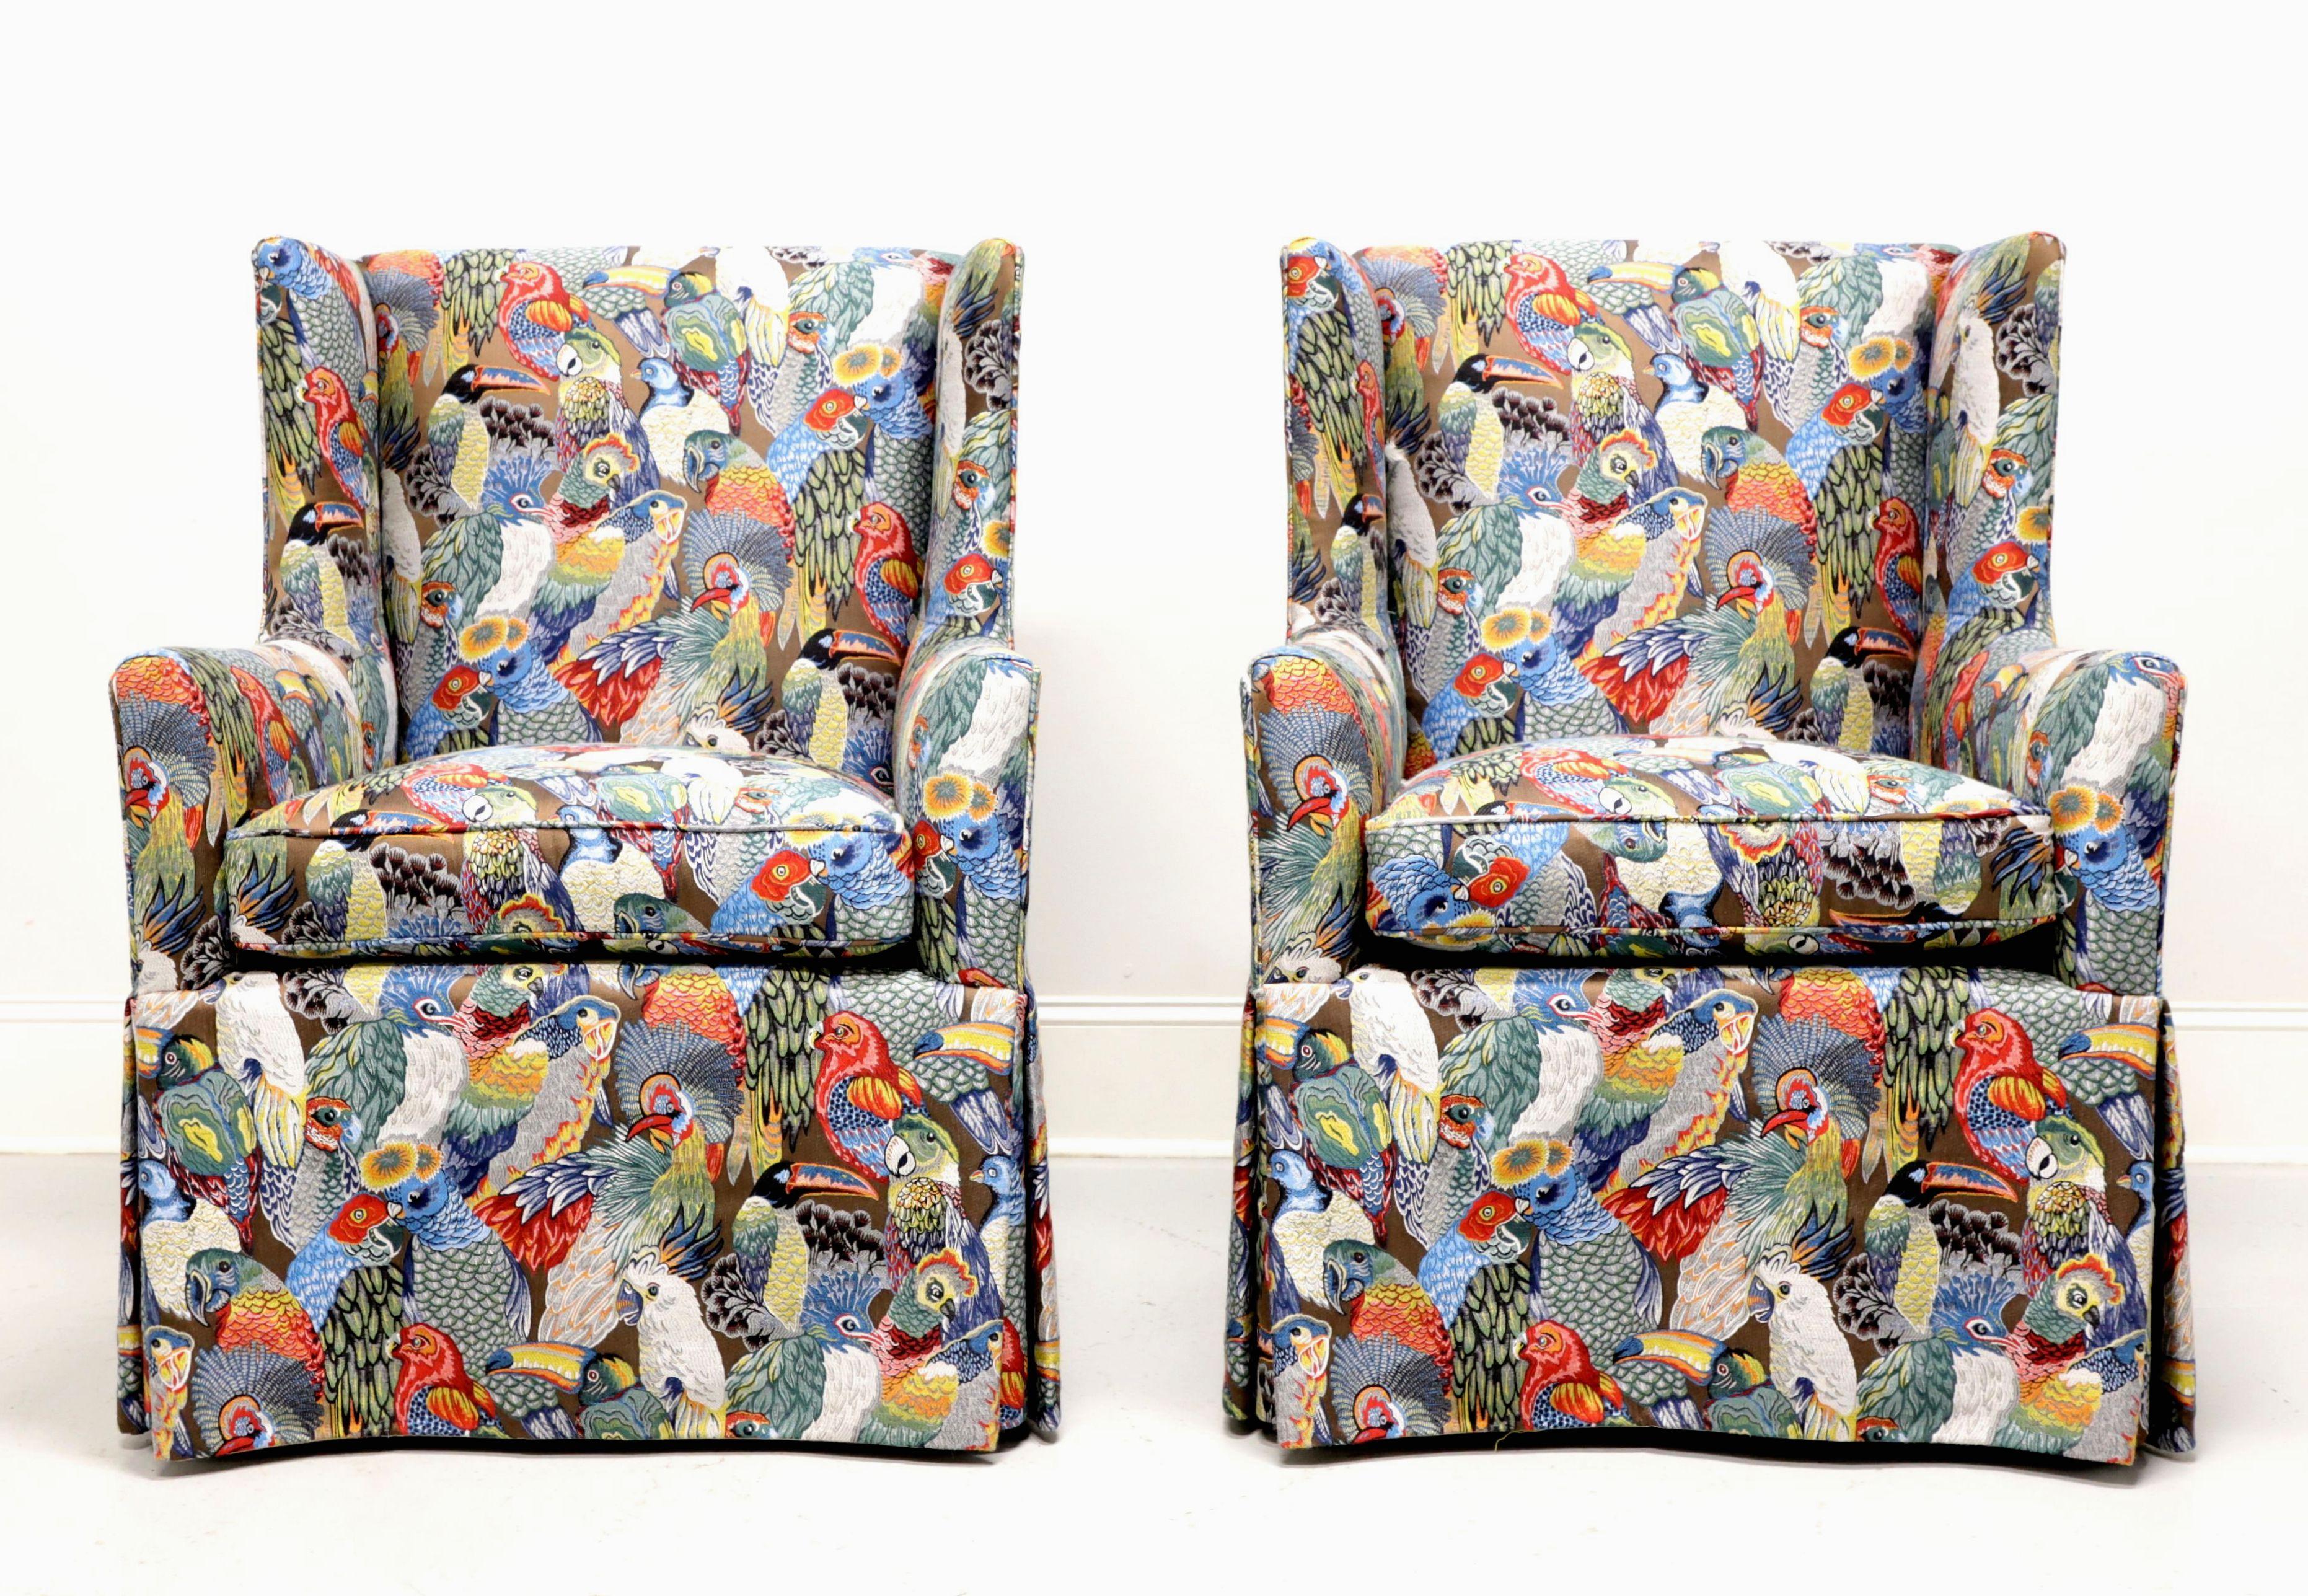 Other 21st Century Traditional Club Chairs in Colorful Bird Themed Fabric - Pair For Sale